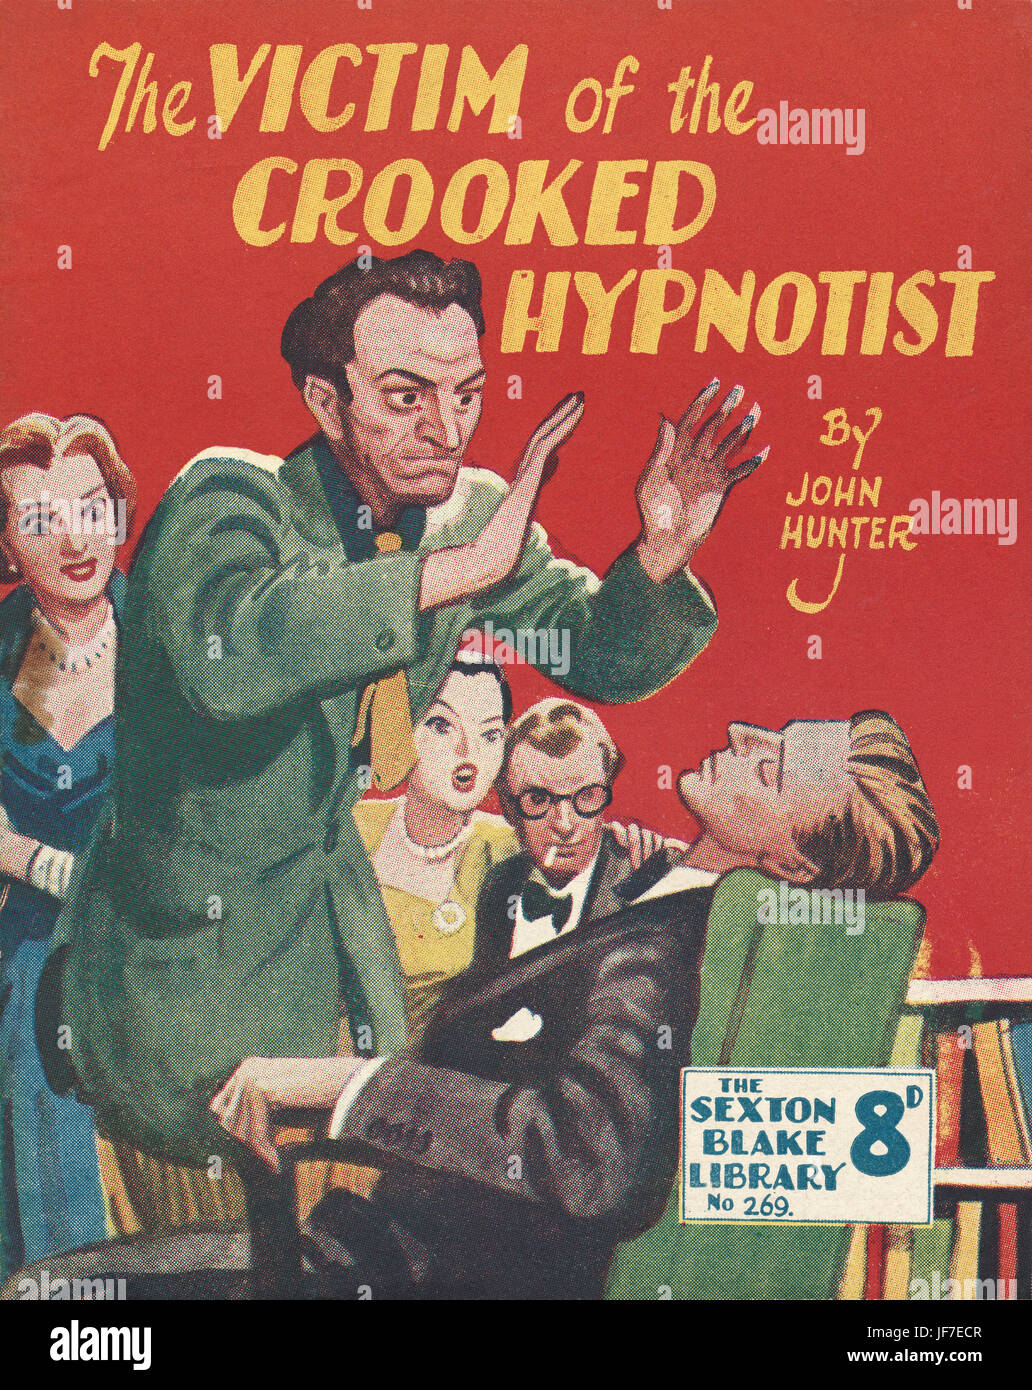 'The Victim of the Crooked Hypnotist,' by John Hunter - book  cover illustration. One man is hypnotised while party guests look on, enthralled.  Artist: Camps.  From The Sexton Blake Library, March 1952.  Published by Fleetway Publications, London. Stock Photo